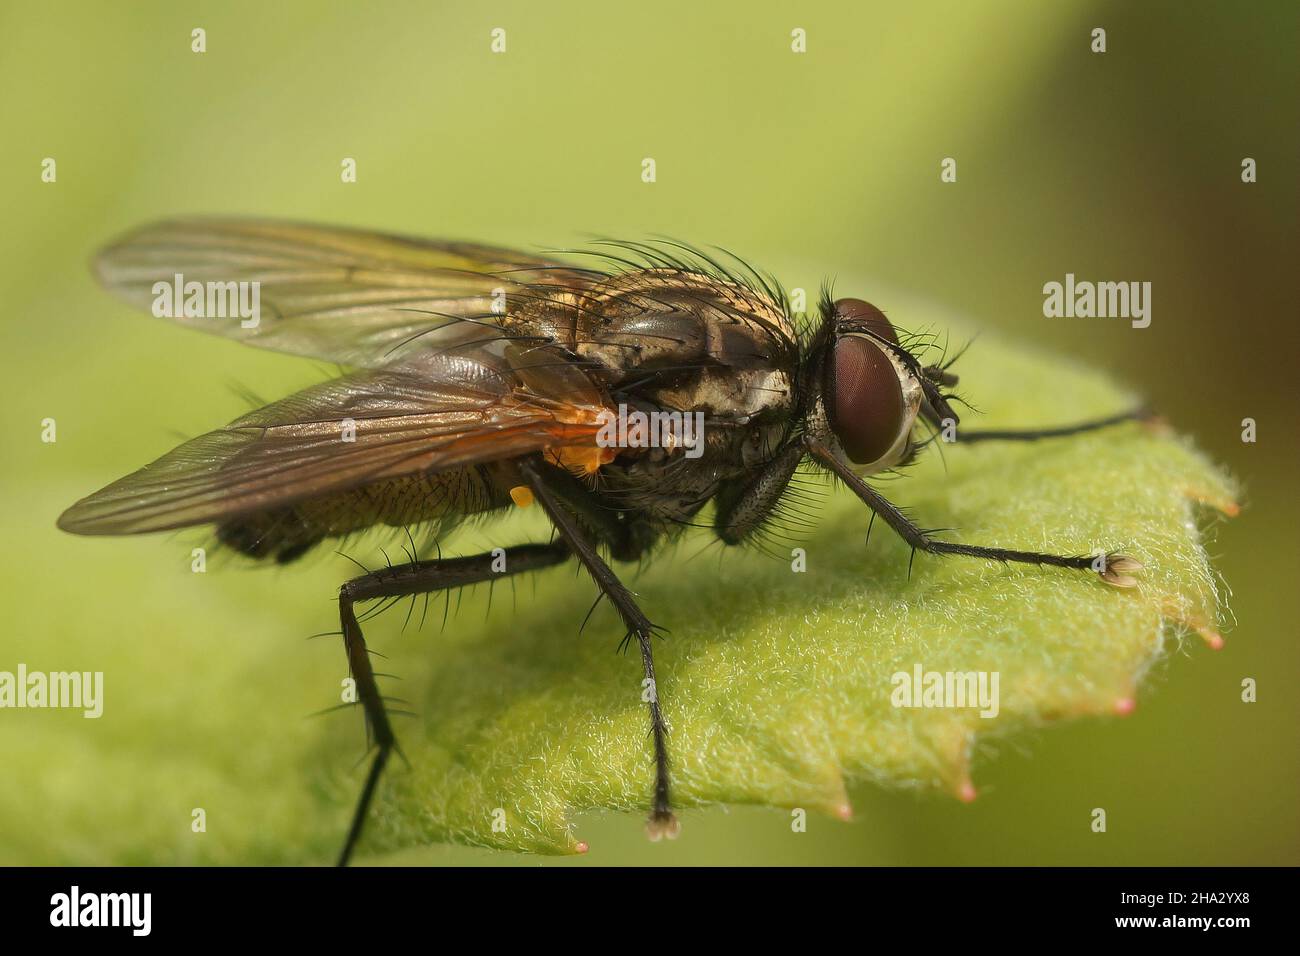 Closeup on a hairy fly, Hydrophoria lancifer, in the garden Stock Photo